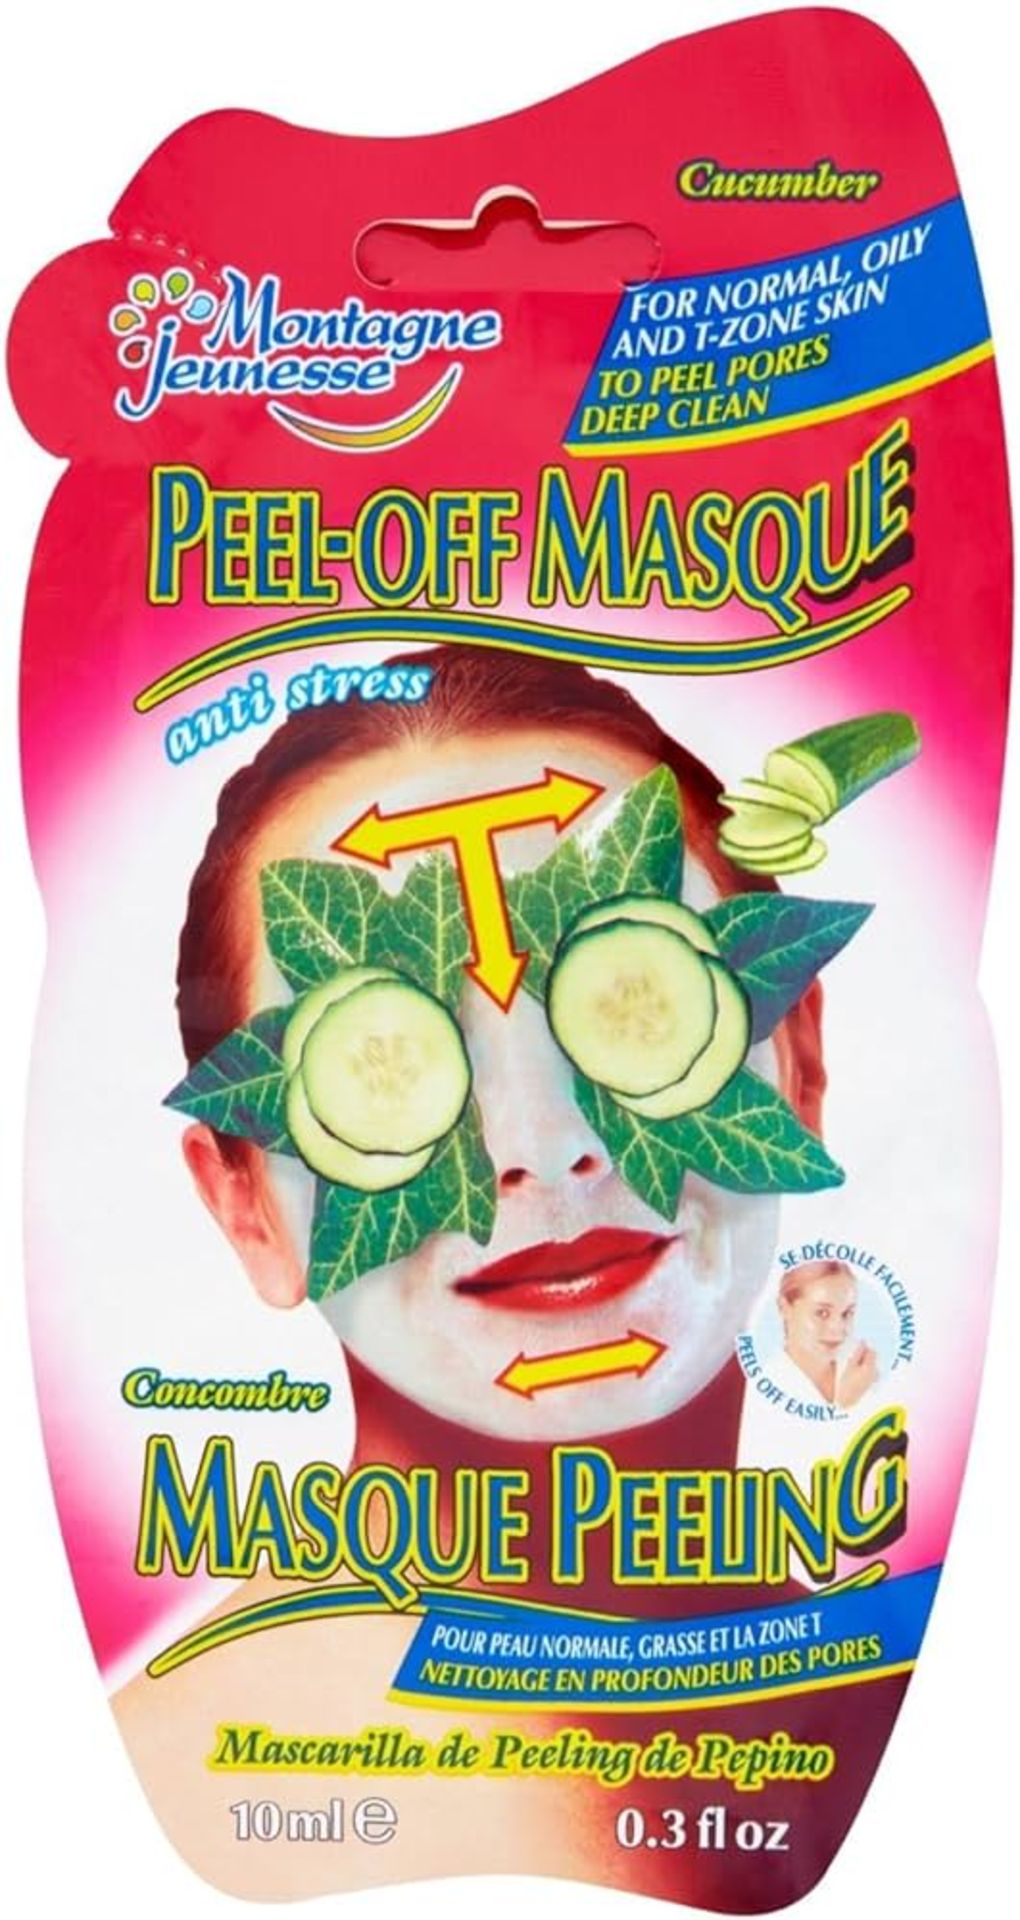 Bulk Trade Lot 200 x Montagne Jeunesse Face Masks. RRPs Vary from £2.50 - £6. This lot has a RRP - Image 13 of 16